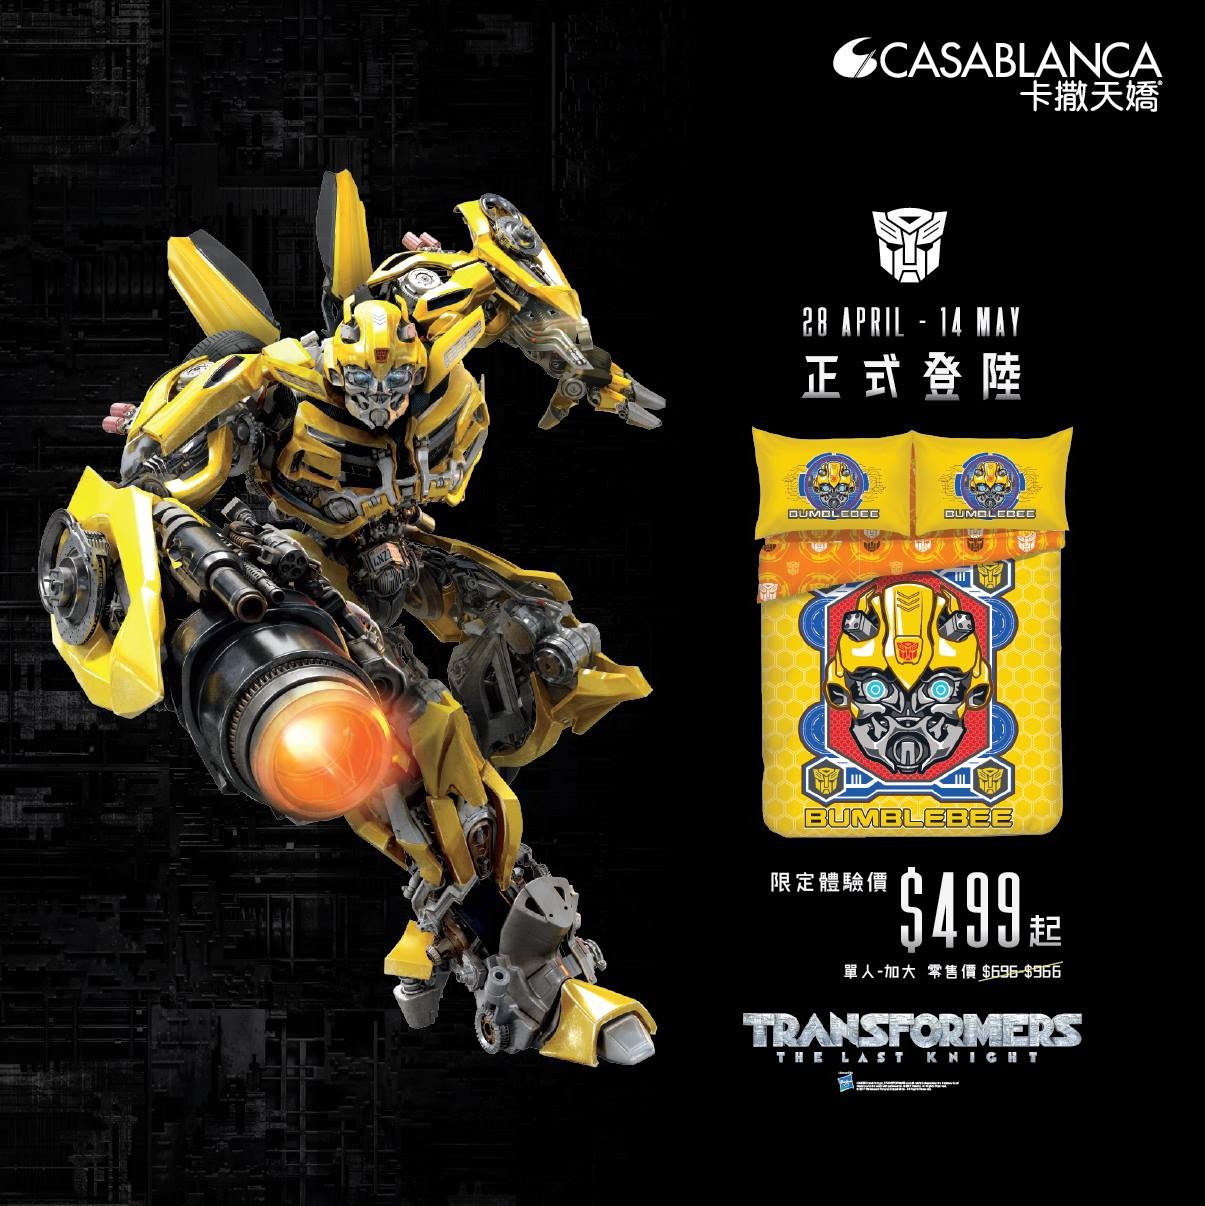 Transformers News: Re: Transformers: The Last Knight Non-Toy Products Discussion Thread